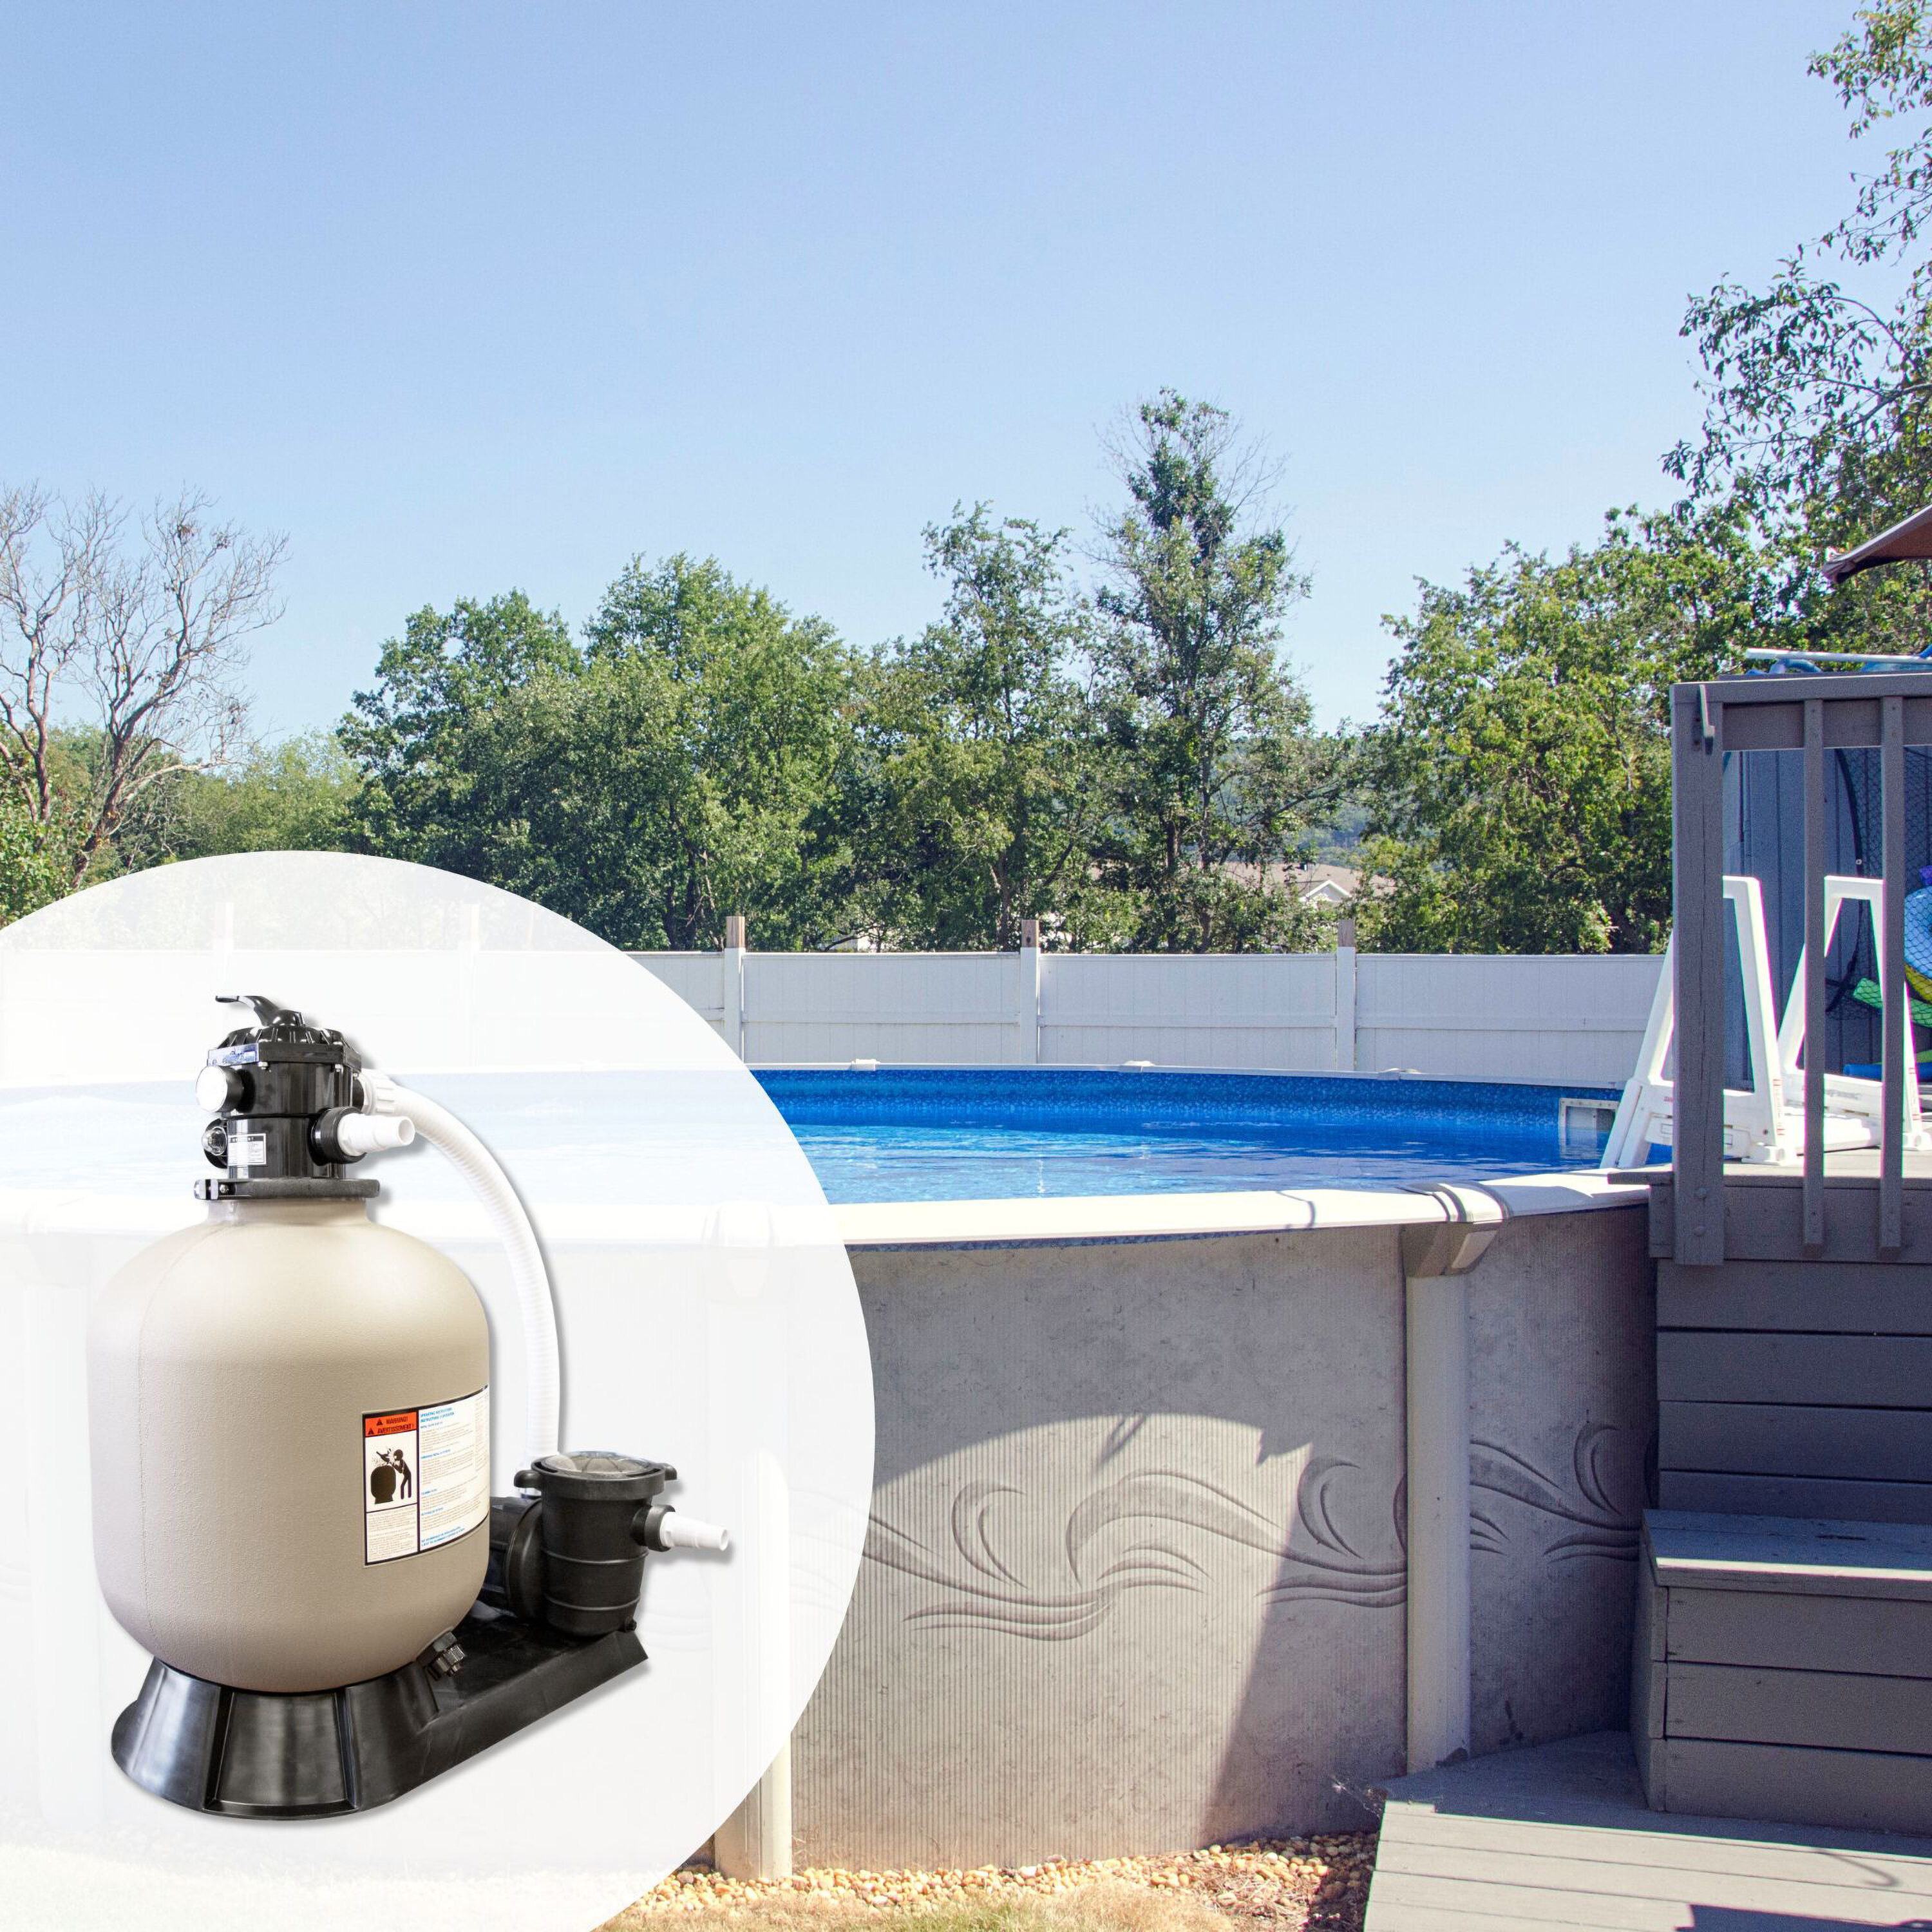 Blue Wave 22-in Sand Filter System w/ 1.5 HP Pump for Above Ground